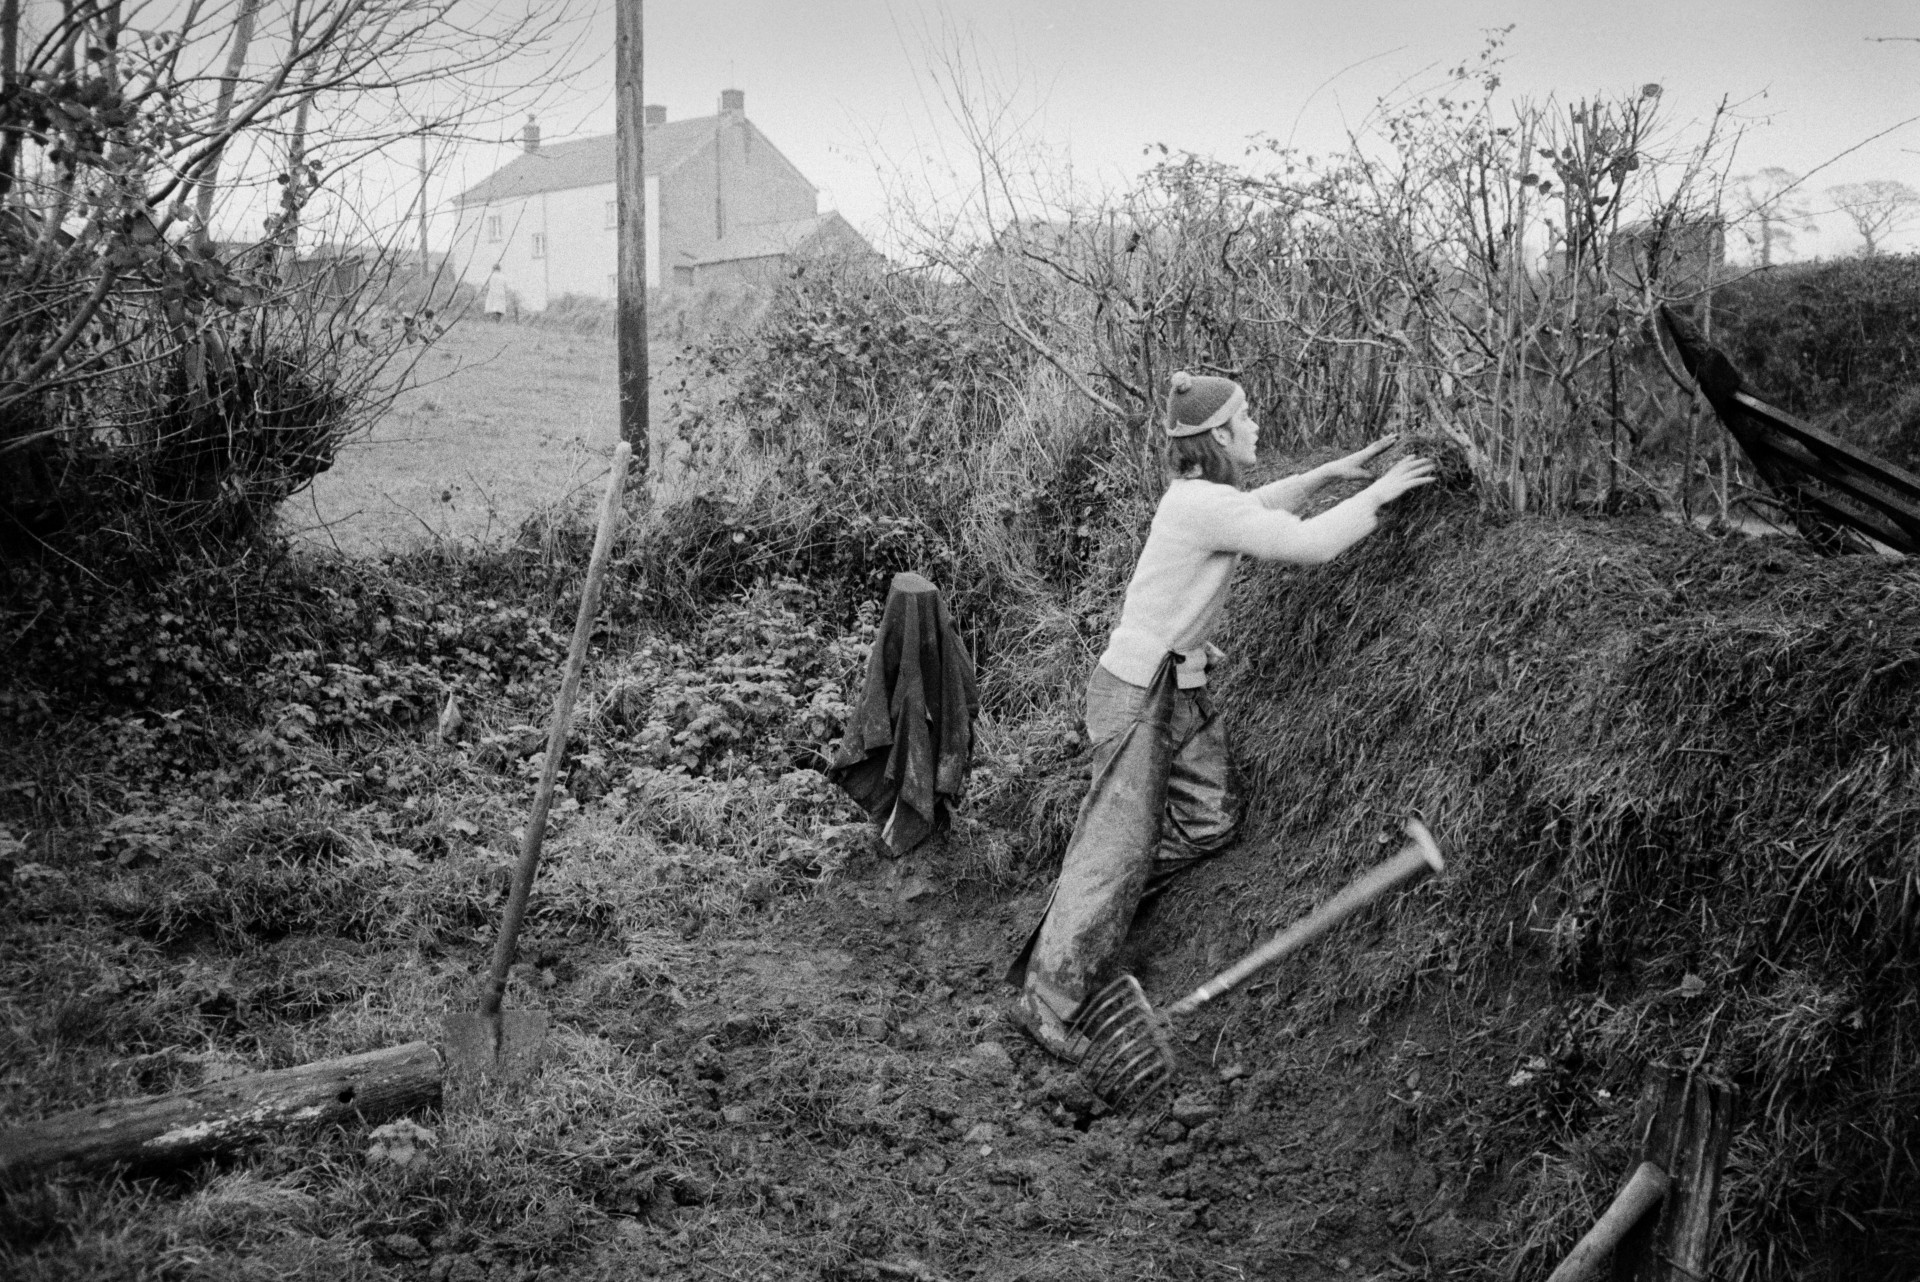 Derek Bright clatting, building up hedge bank with turf, in a field at Mill Road Farm, Beaford. A fork and spade are nearby and a farmhouse can be seen in the background. The farm was also known as Jeffrys.